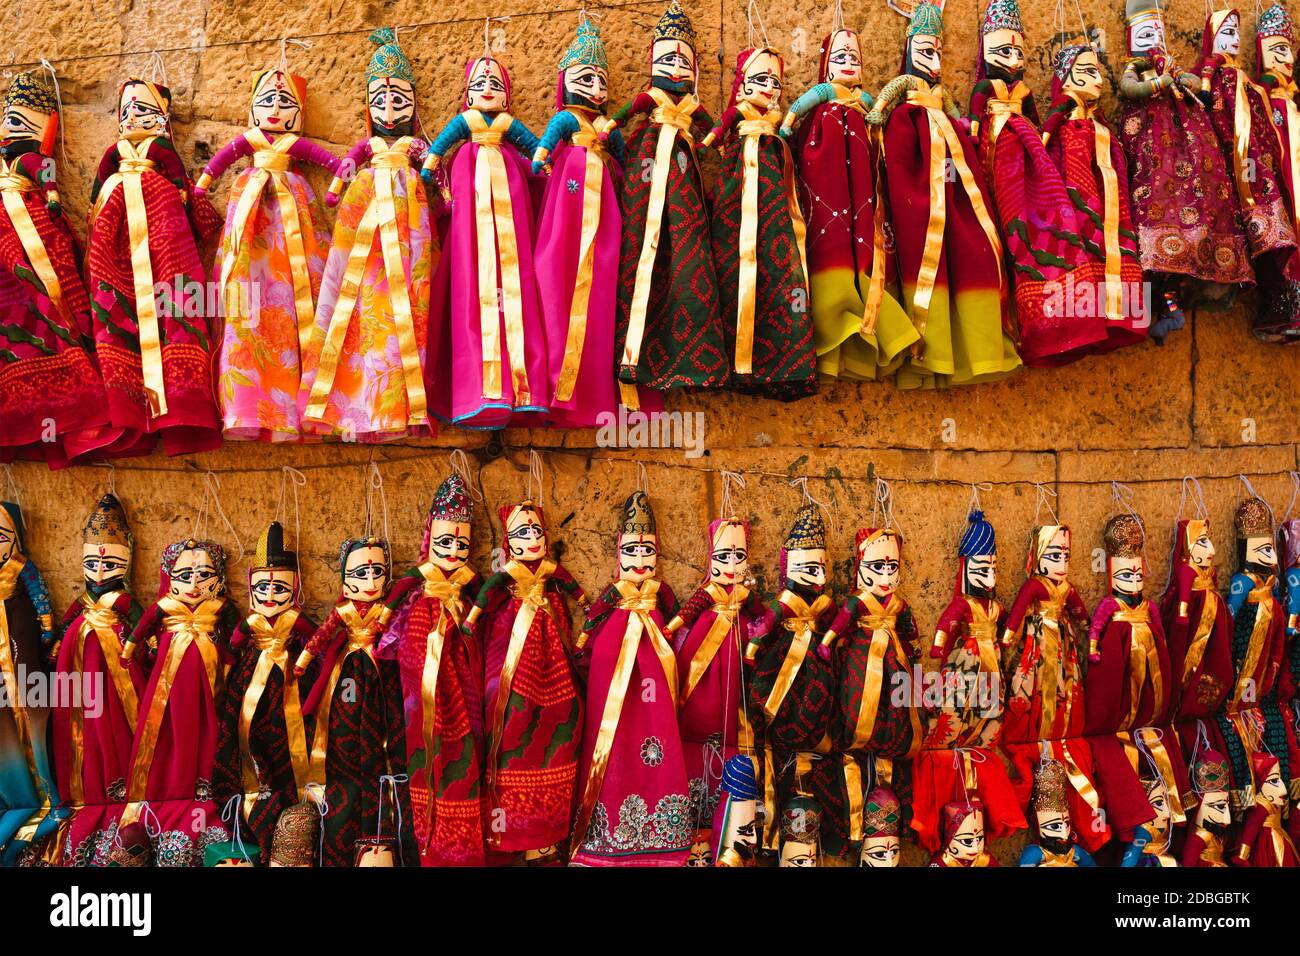 Colorful handmade traditional Rajasthani puppets for sale in Jaisalmer, Rajasthan, India. Stock Photo